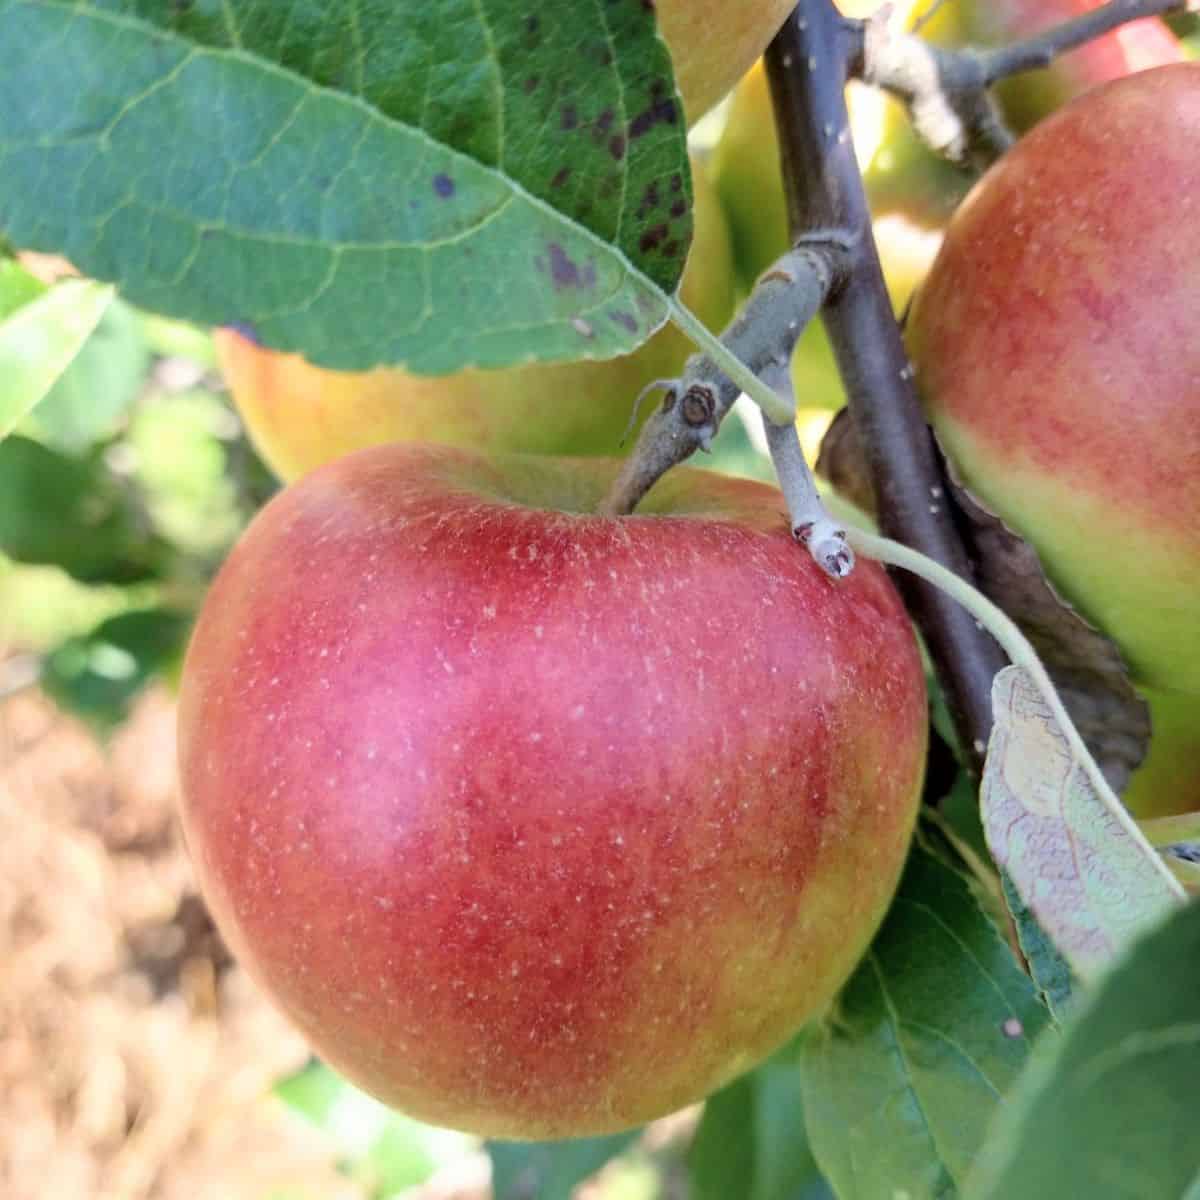 A close up for a Prima apple hanging in a tree.